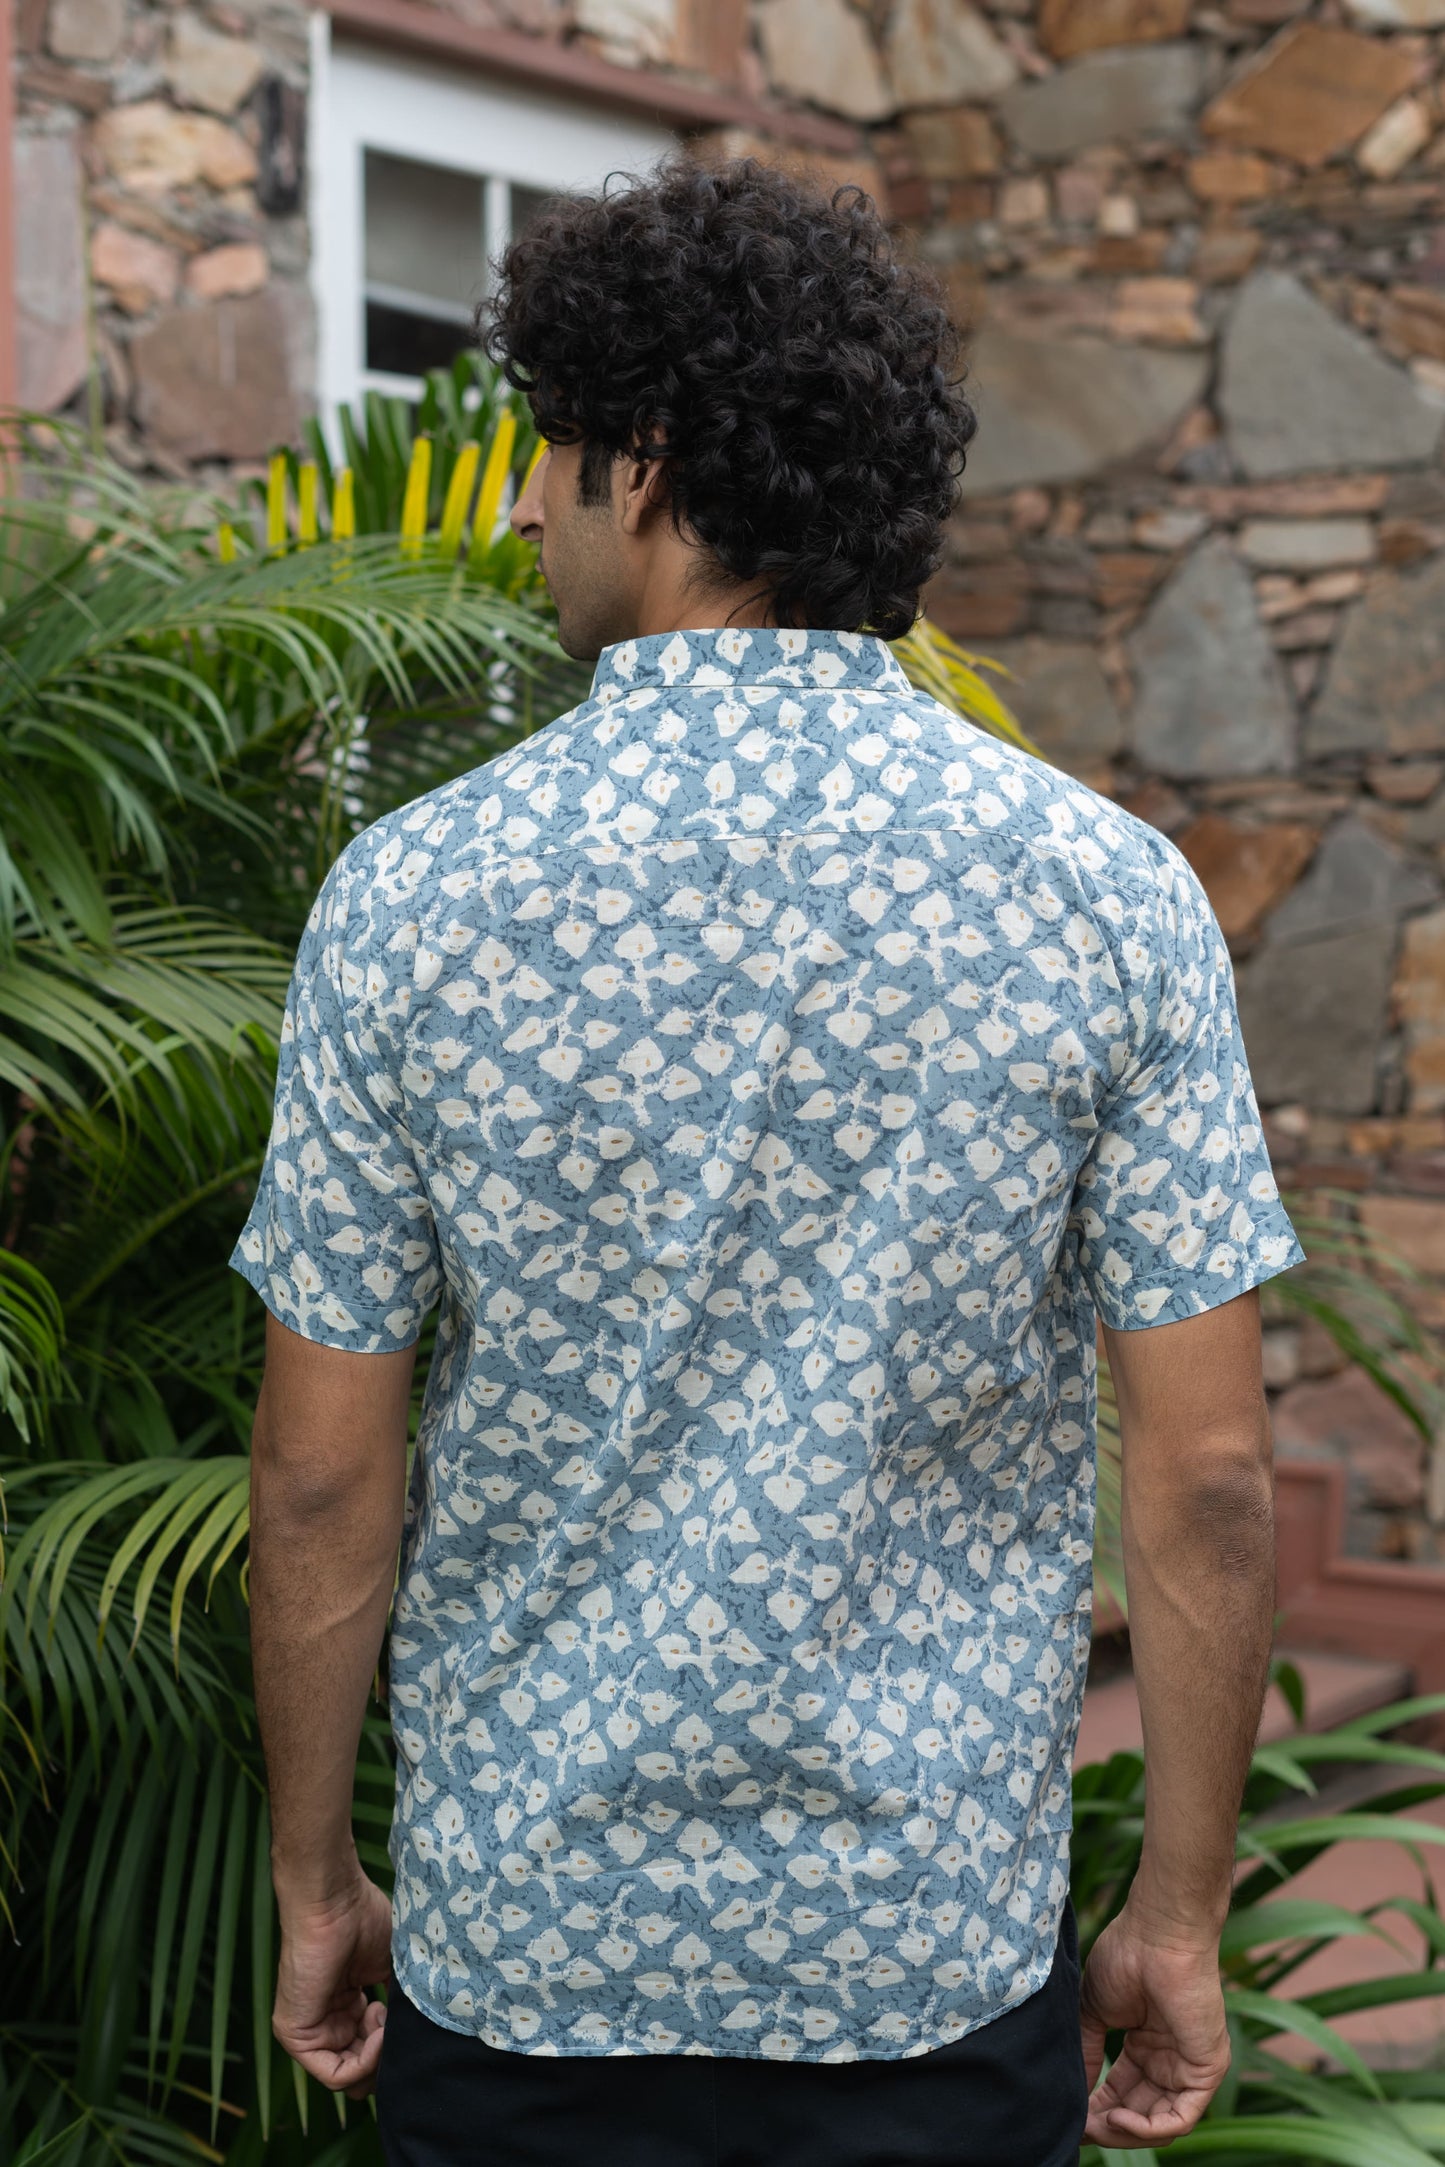 The Sky Blue Half Sleeves Shirt In Floral Foil Print